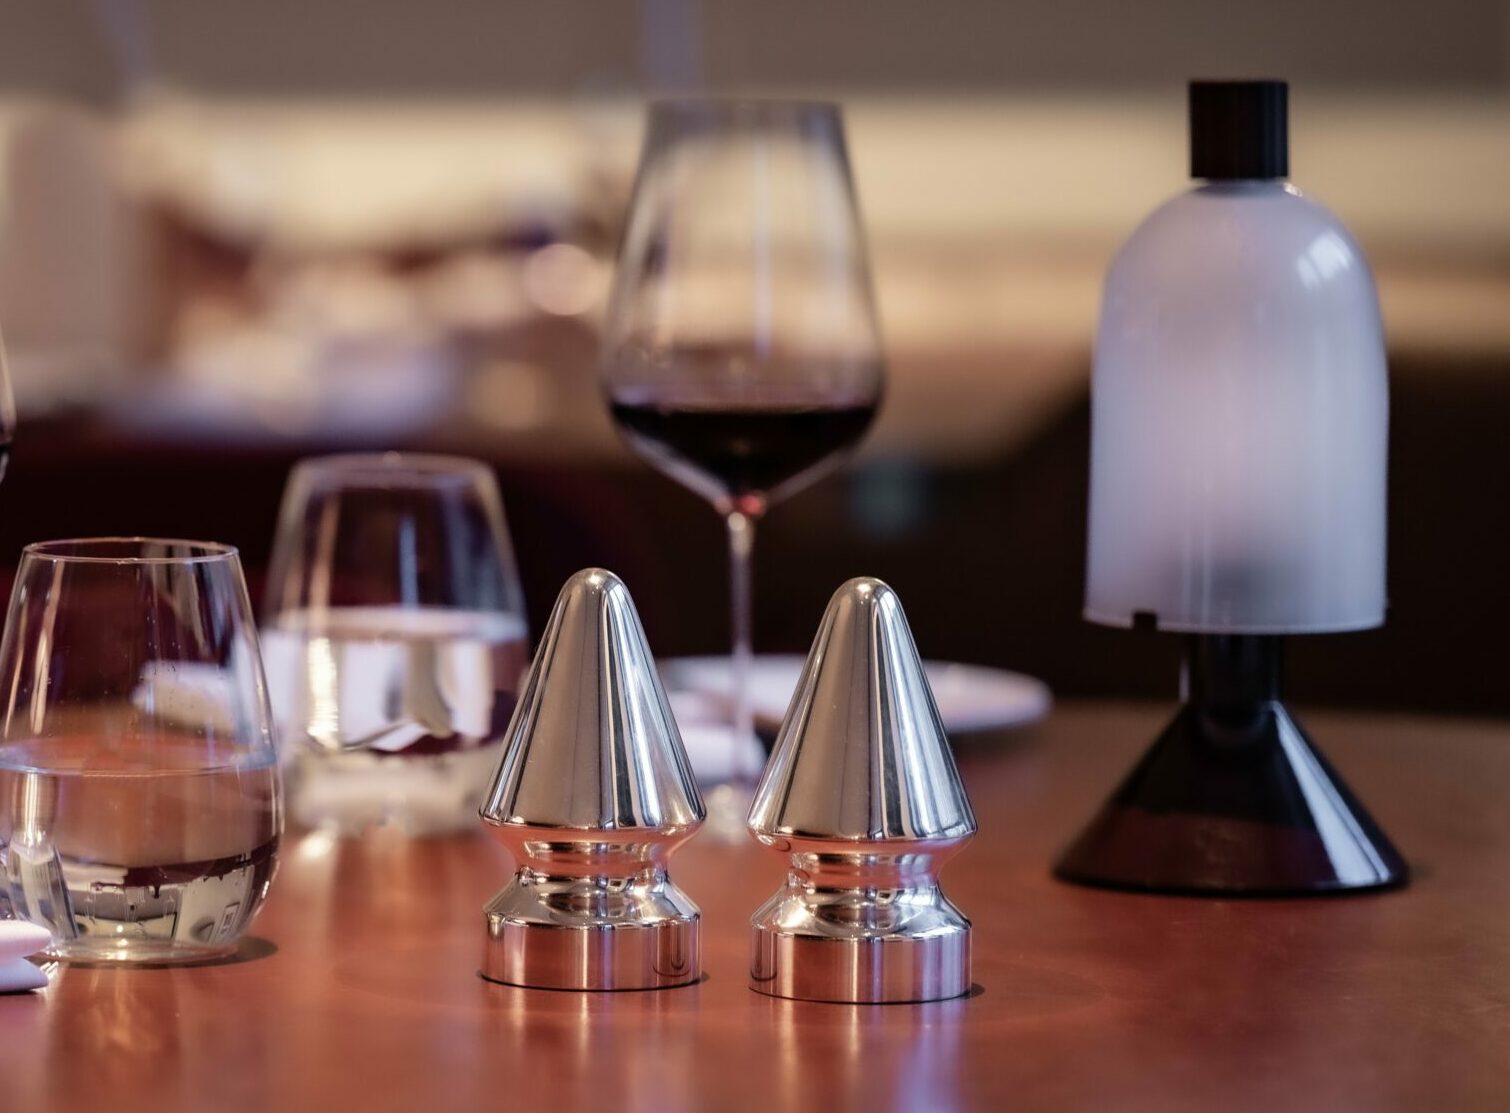 A salt and pepper dispensers on a table